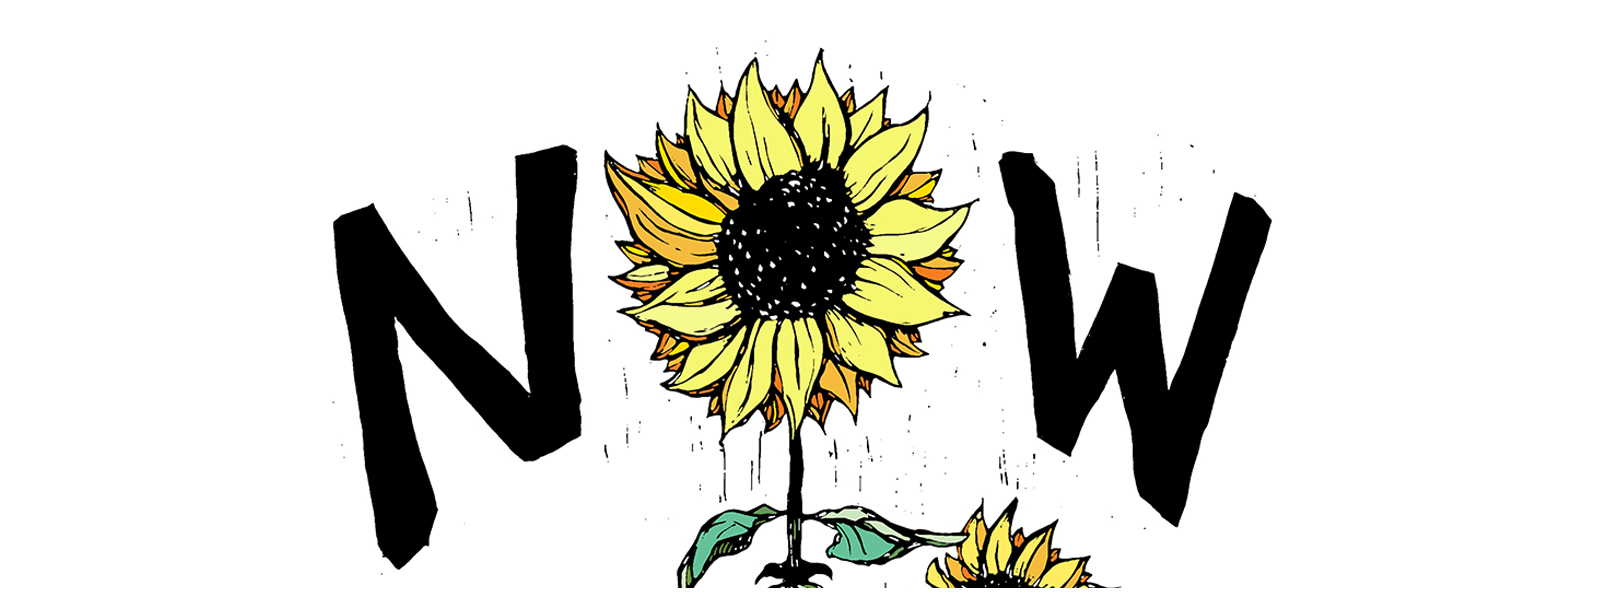 NOW is spelled out with a yellow sunflower in place of the O. This is a close up preview of the linked image.